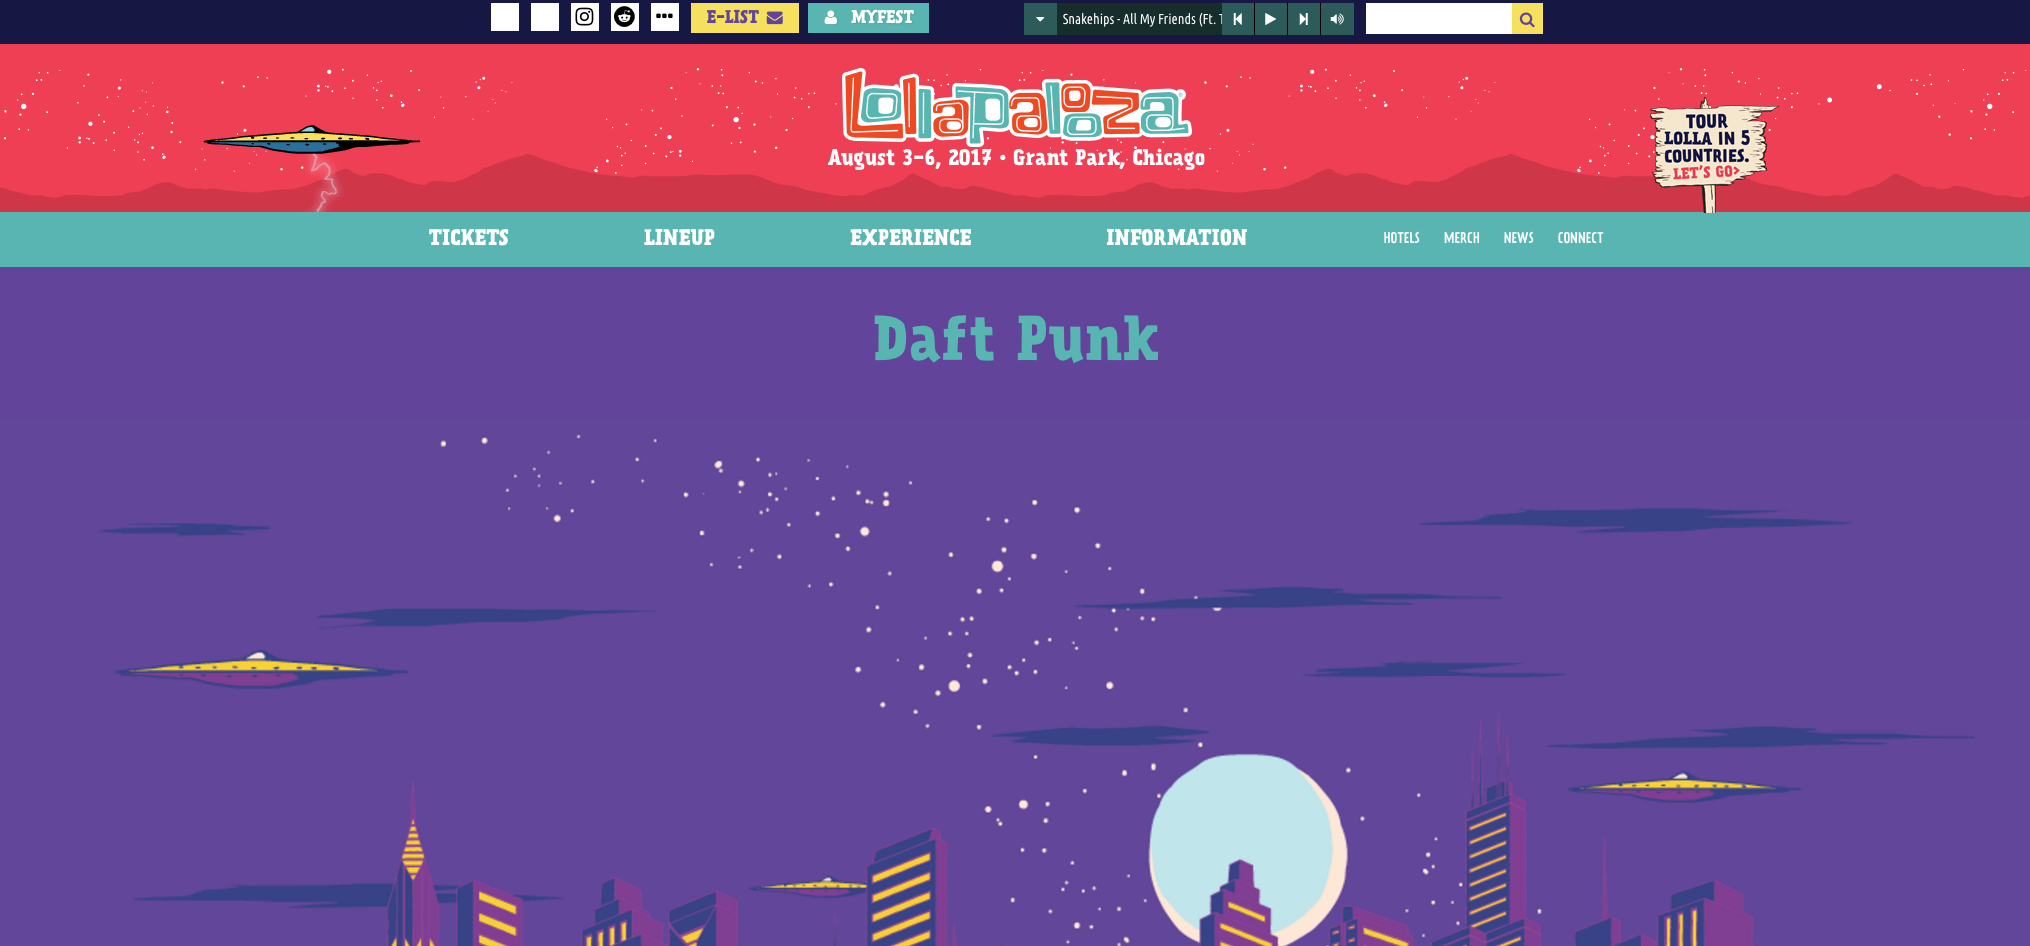 A screen grab of Daft Punk's Lollapalooza "page."